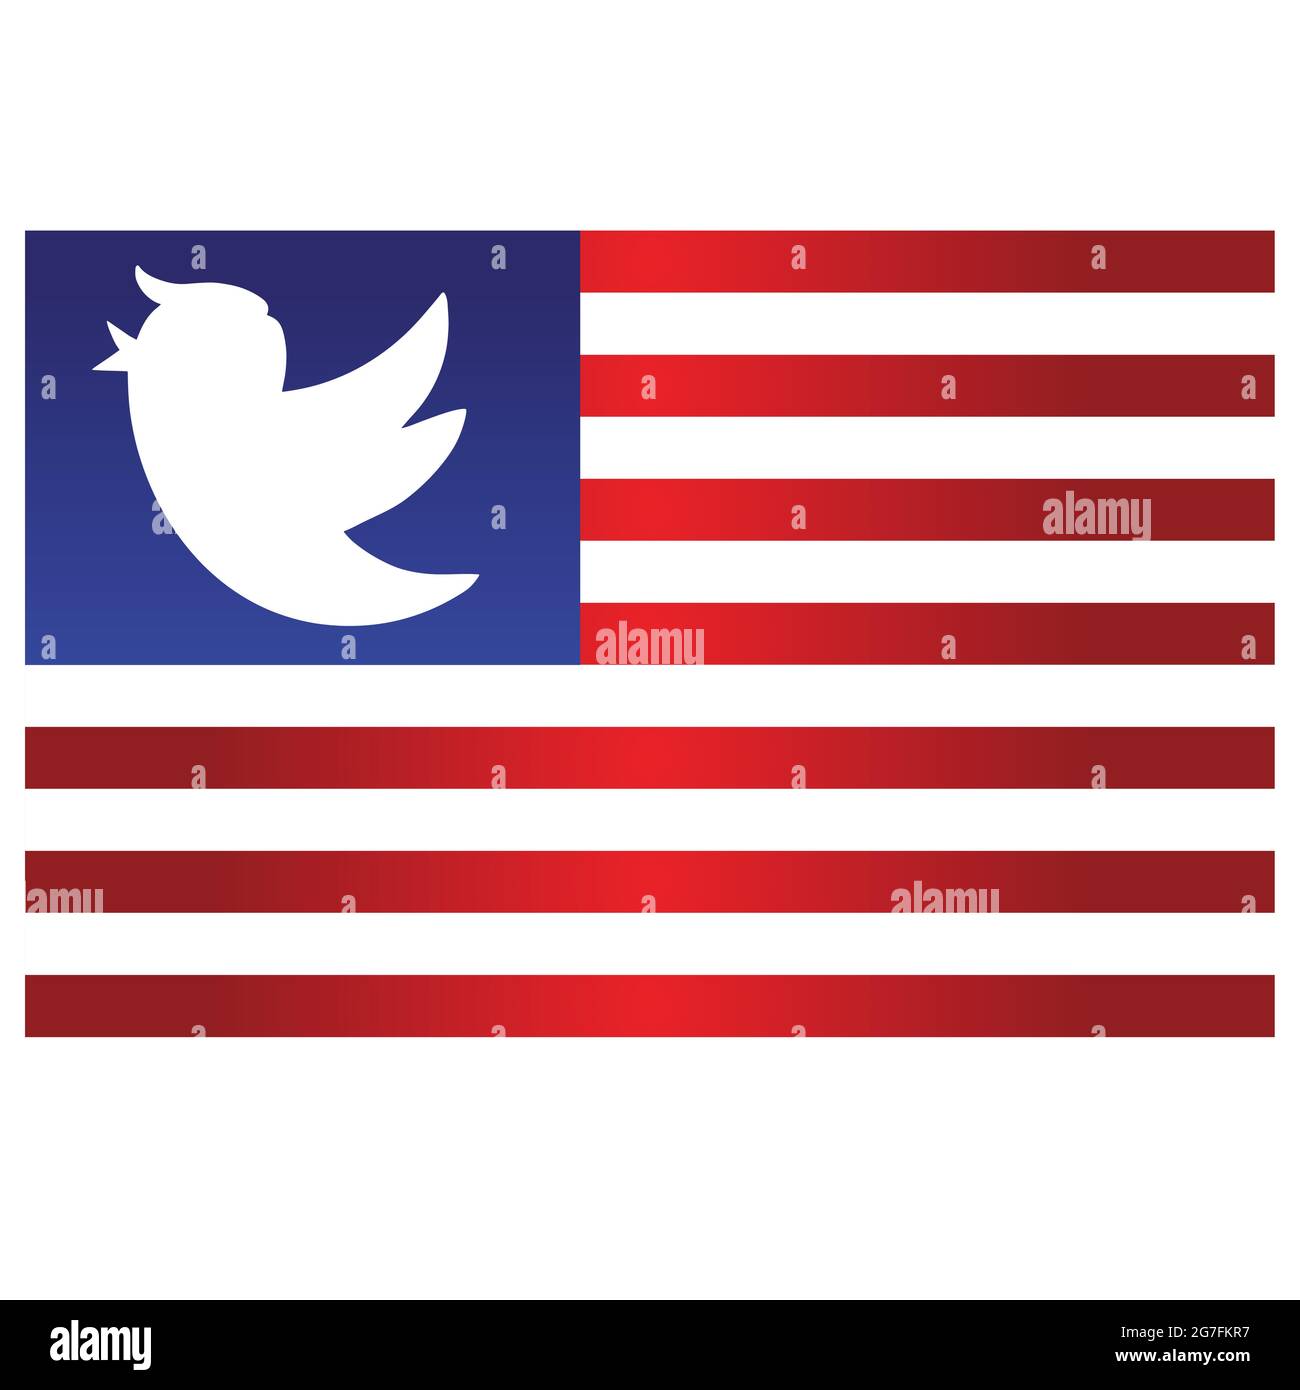 Trump Bird Icon on Blue and Red Stripes Flag Sign Background. Vector Cartoon Illustration. Stock Vector